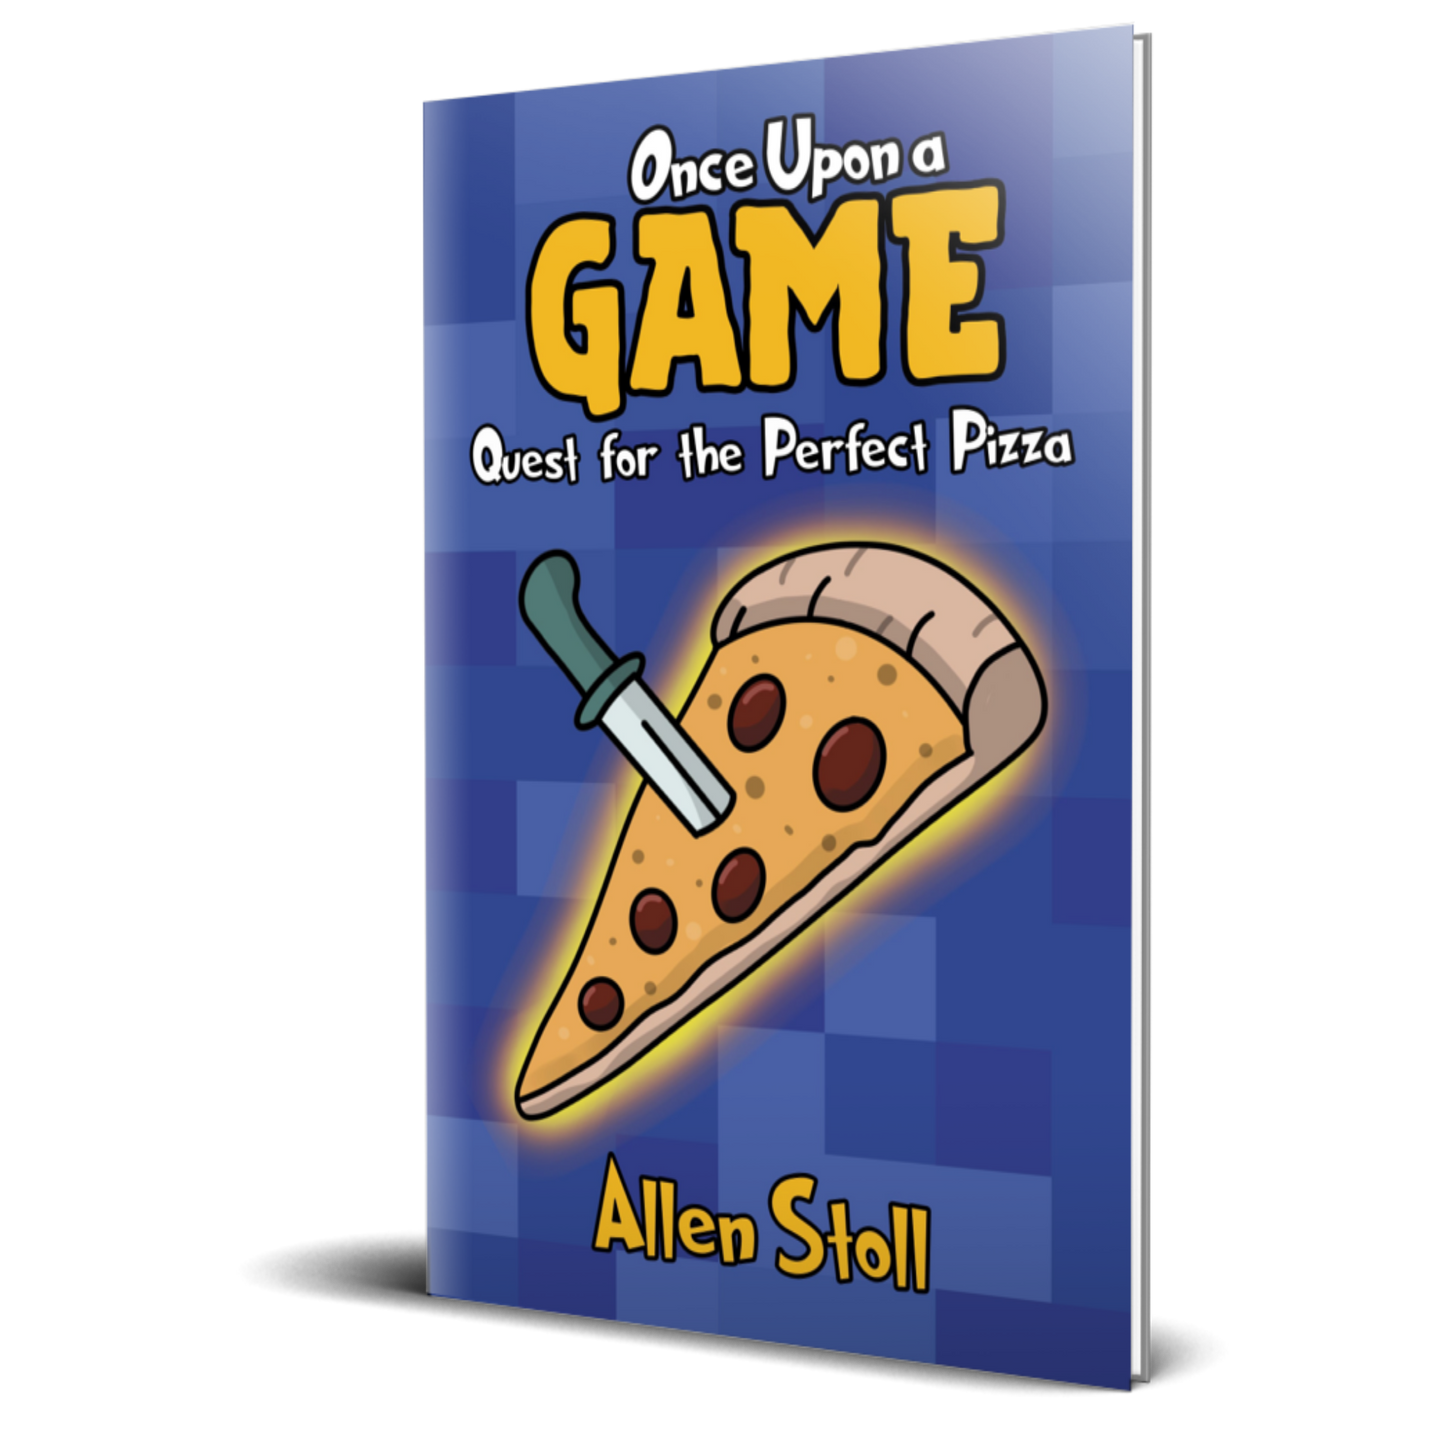 Once Upon a Game: Quest for the Perfect Pizza (Signed HARDCOVER)